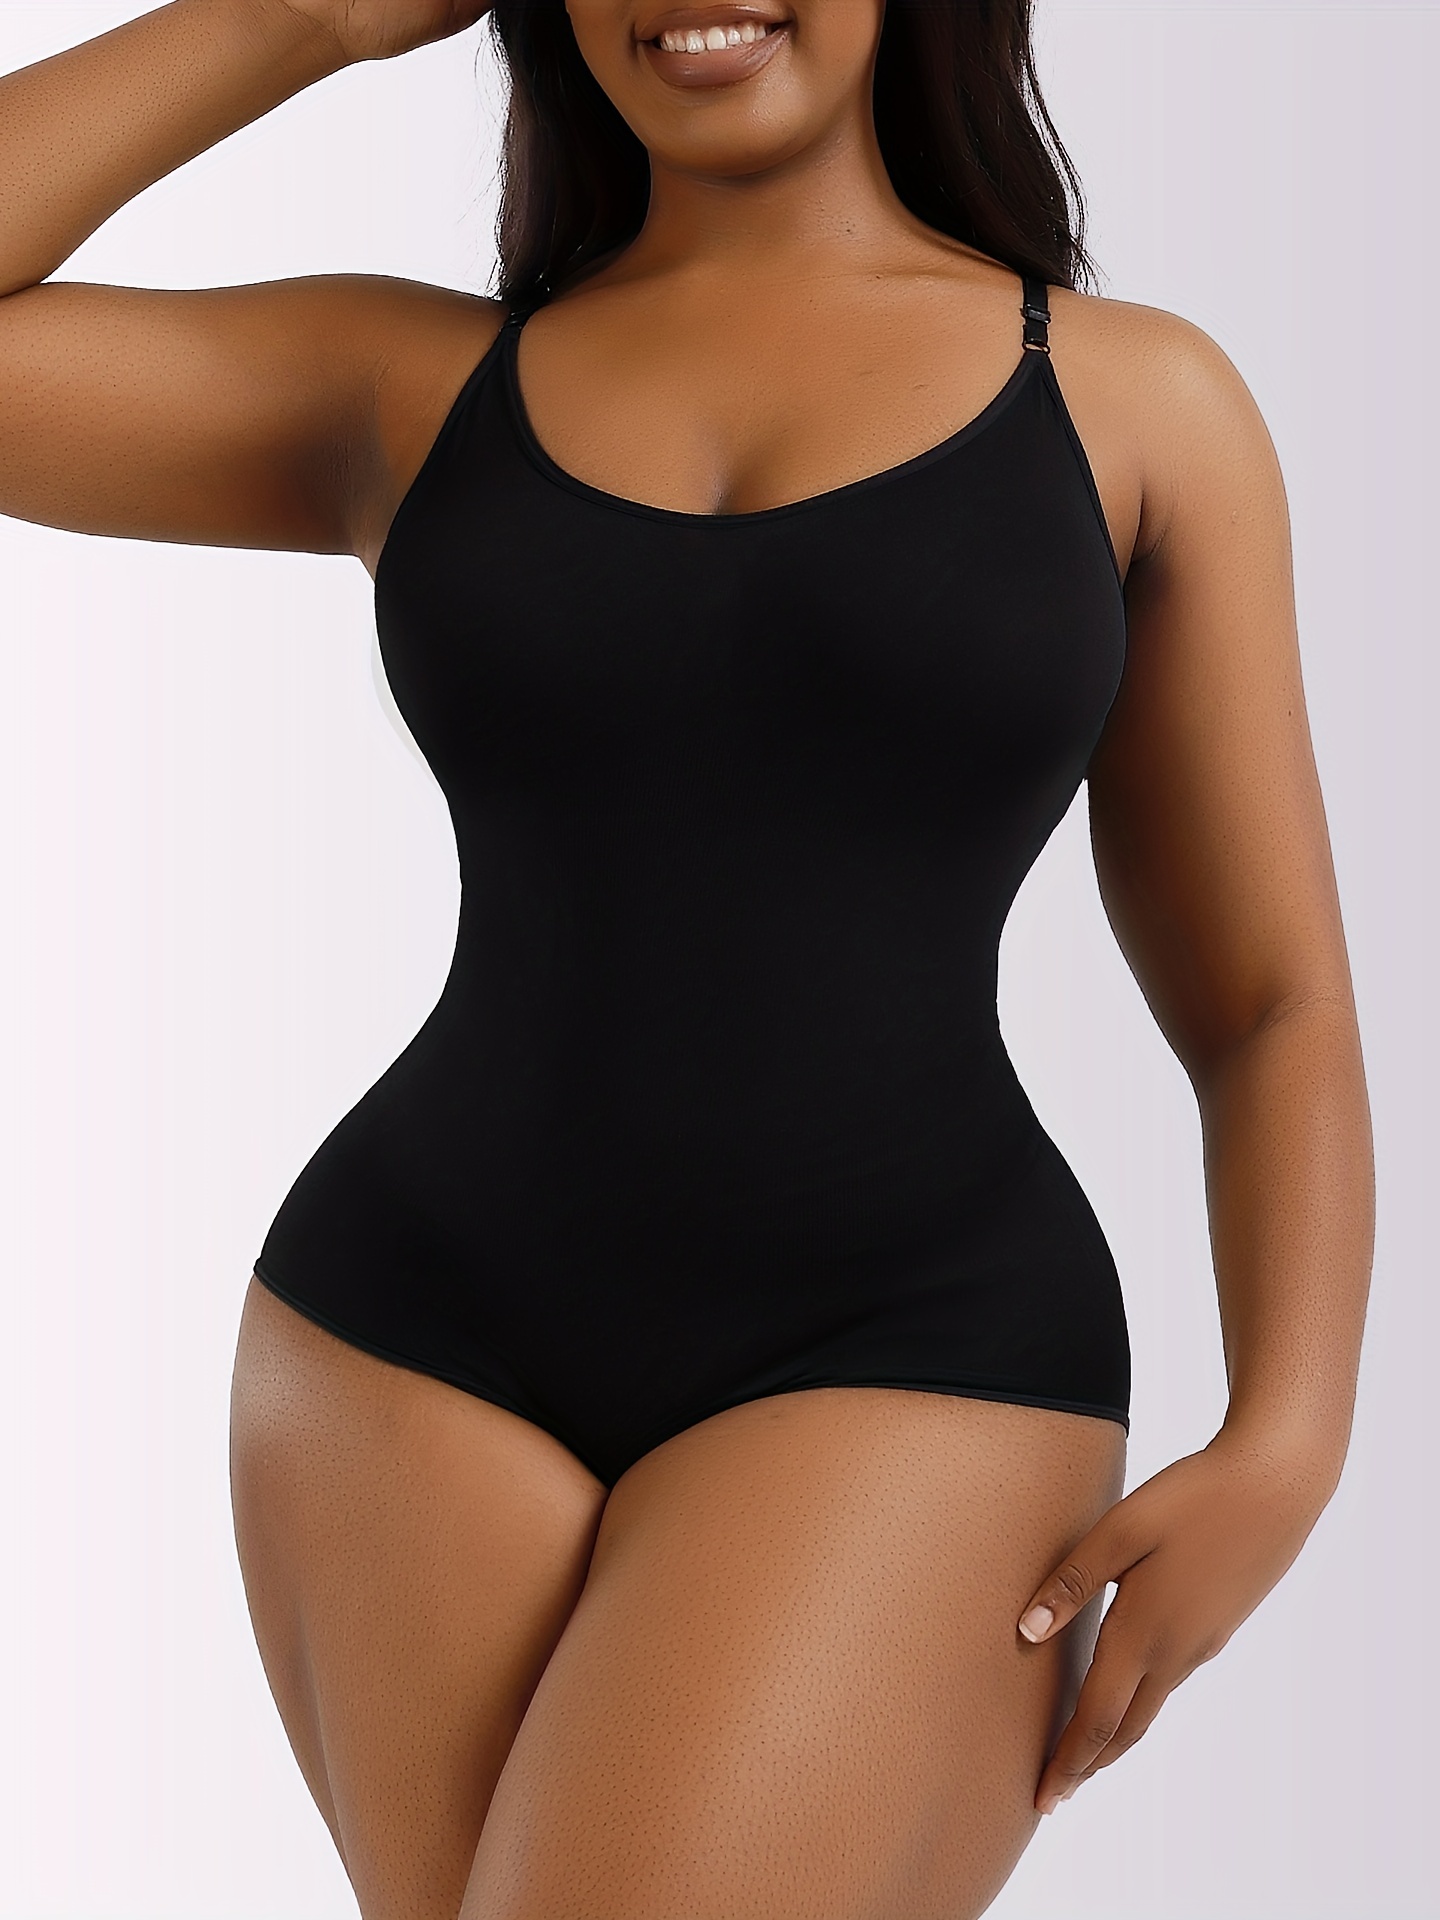 Sculpting Corset Swimsuits-Women Tummy Control Plus Size Camisole Backless  One-Piece Swimsuit Bikini Tie in Back (Black,XS) at  Women's Clothing  store